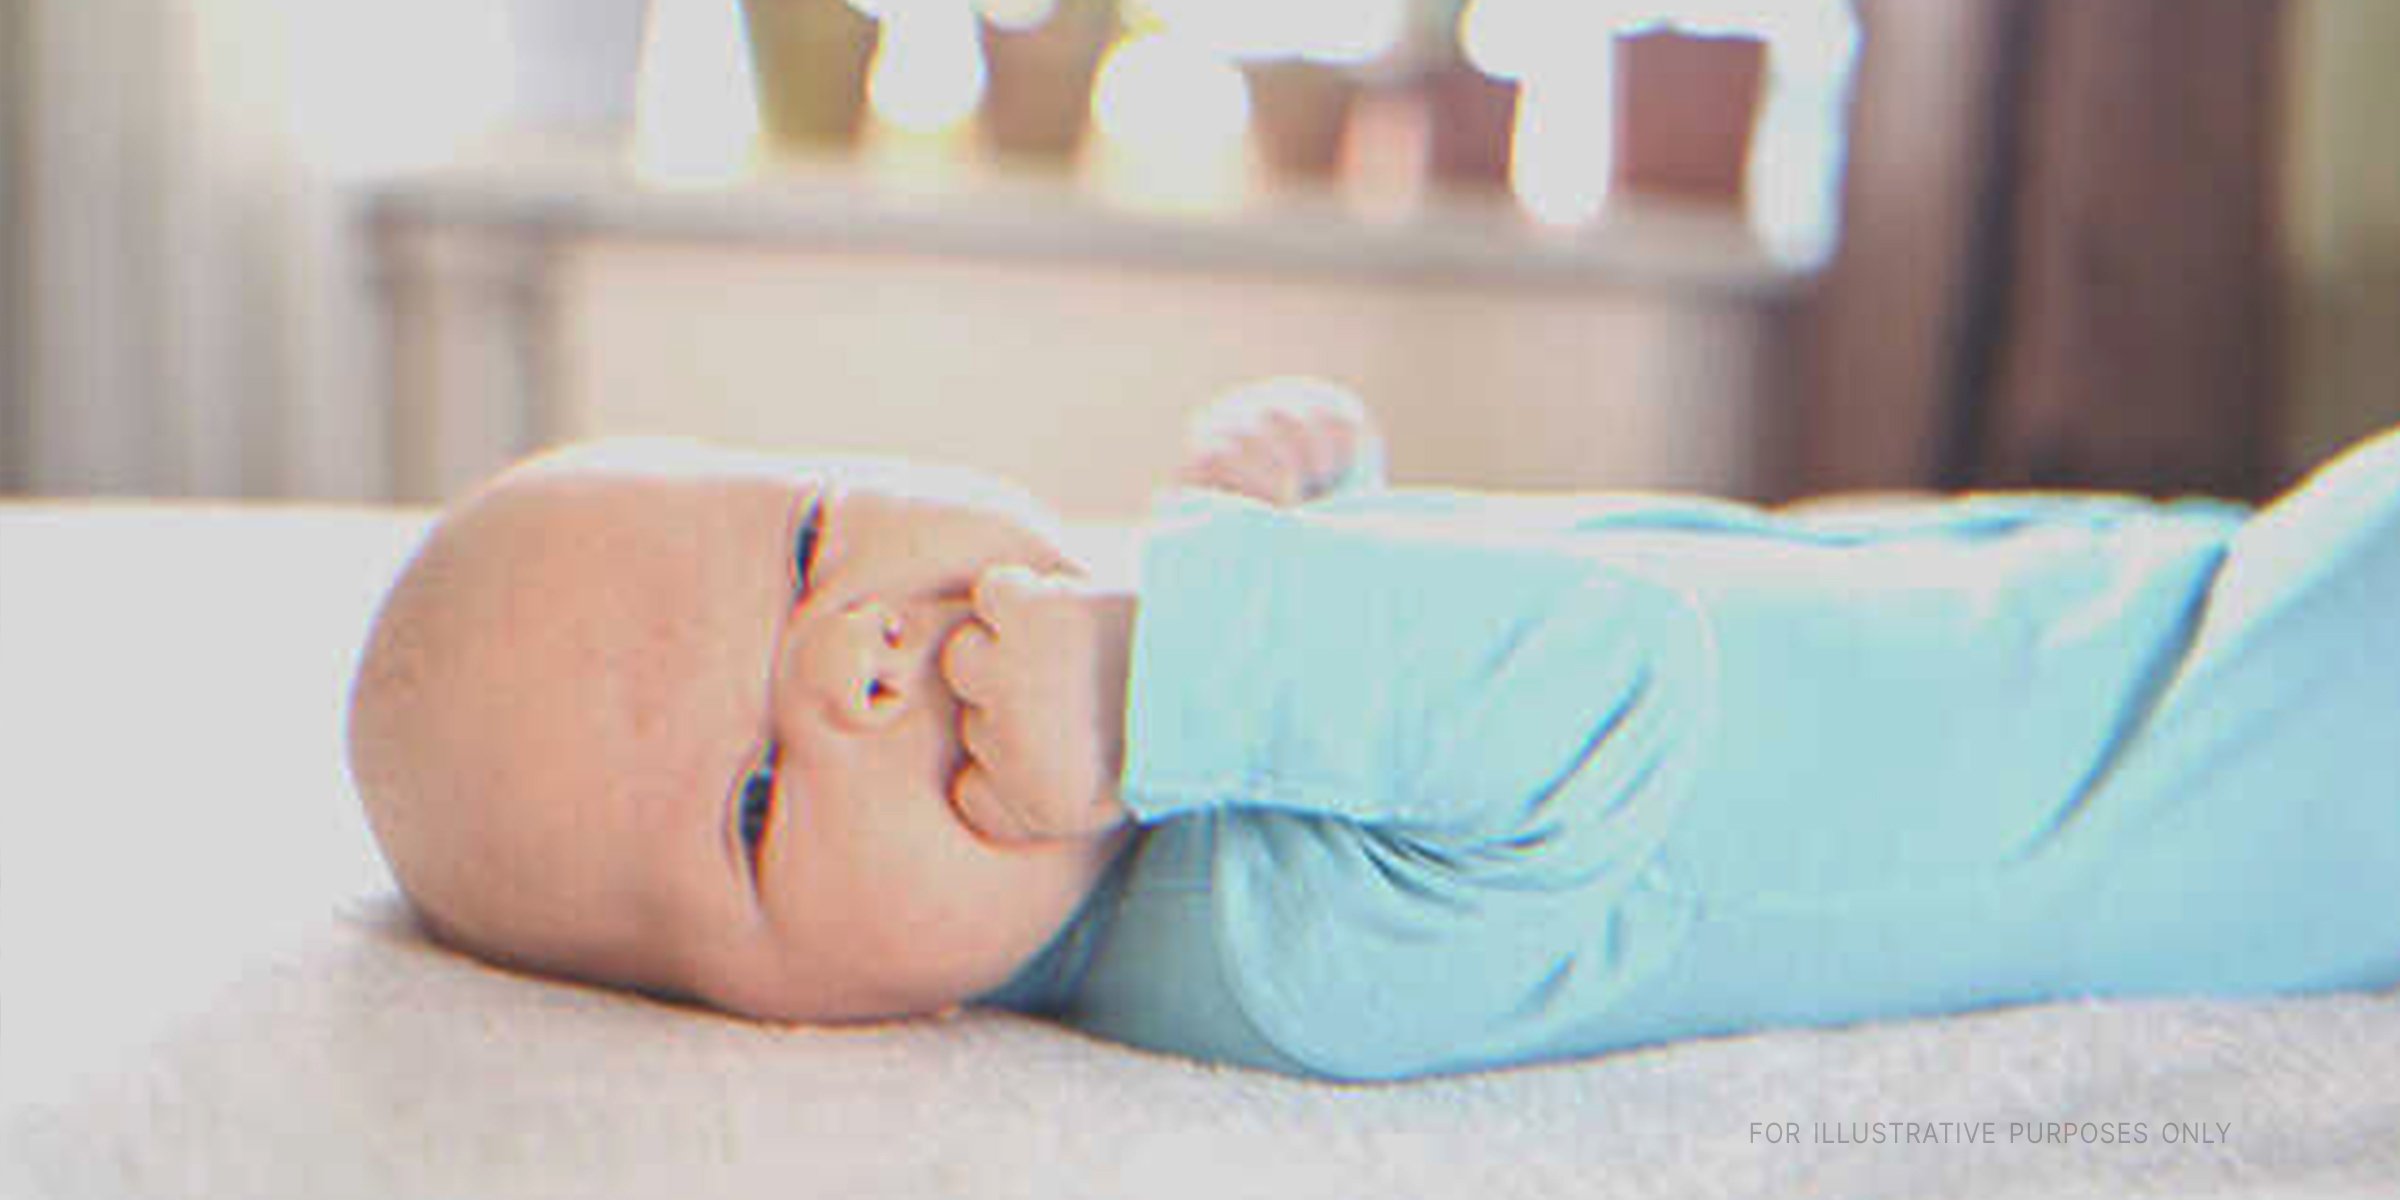 Baby on bed | Shutterstock